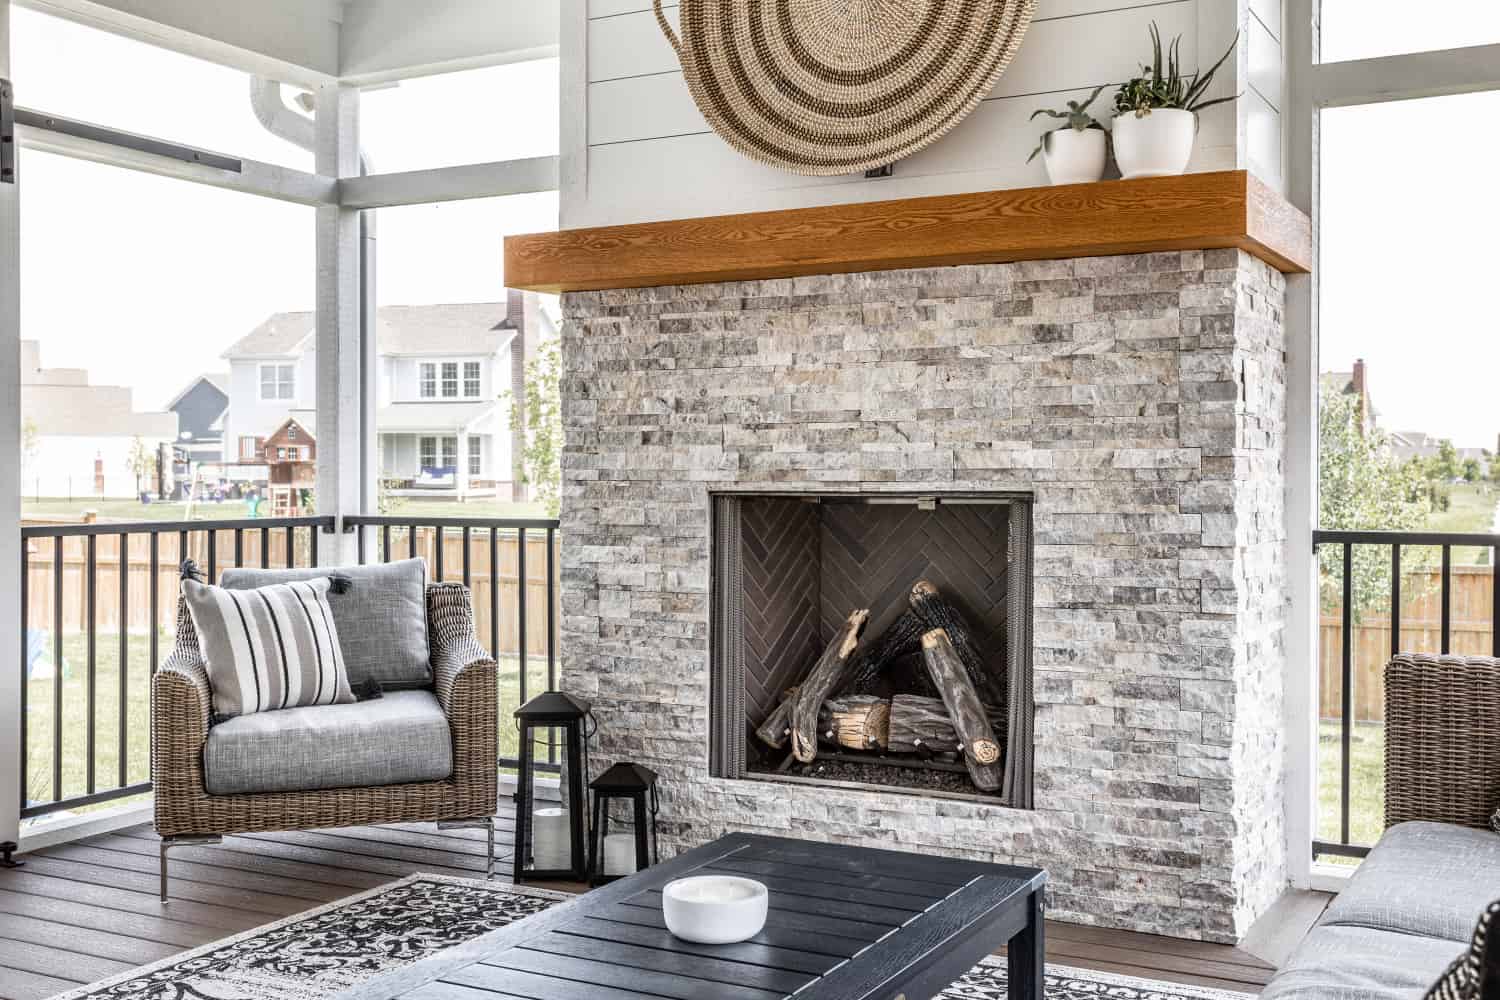 Nicholas Design Build | Remodel: A refurbished patio with a stone fireplace and wicker furniture.